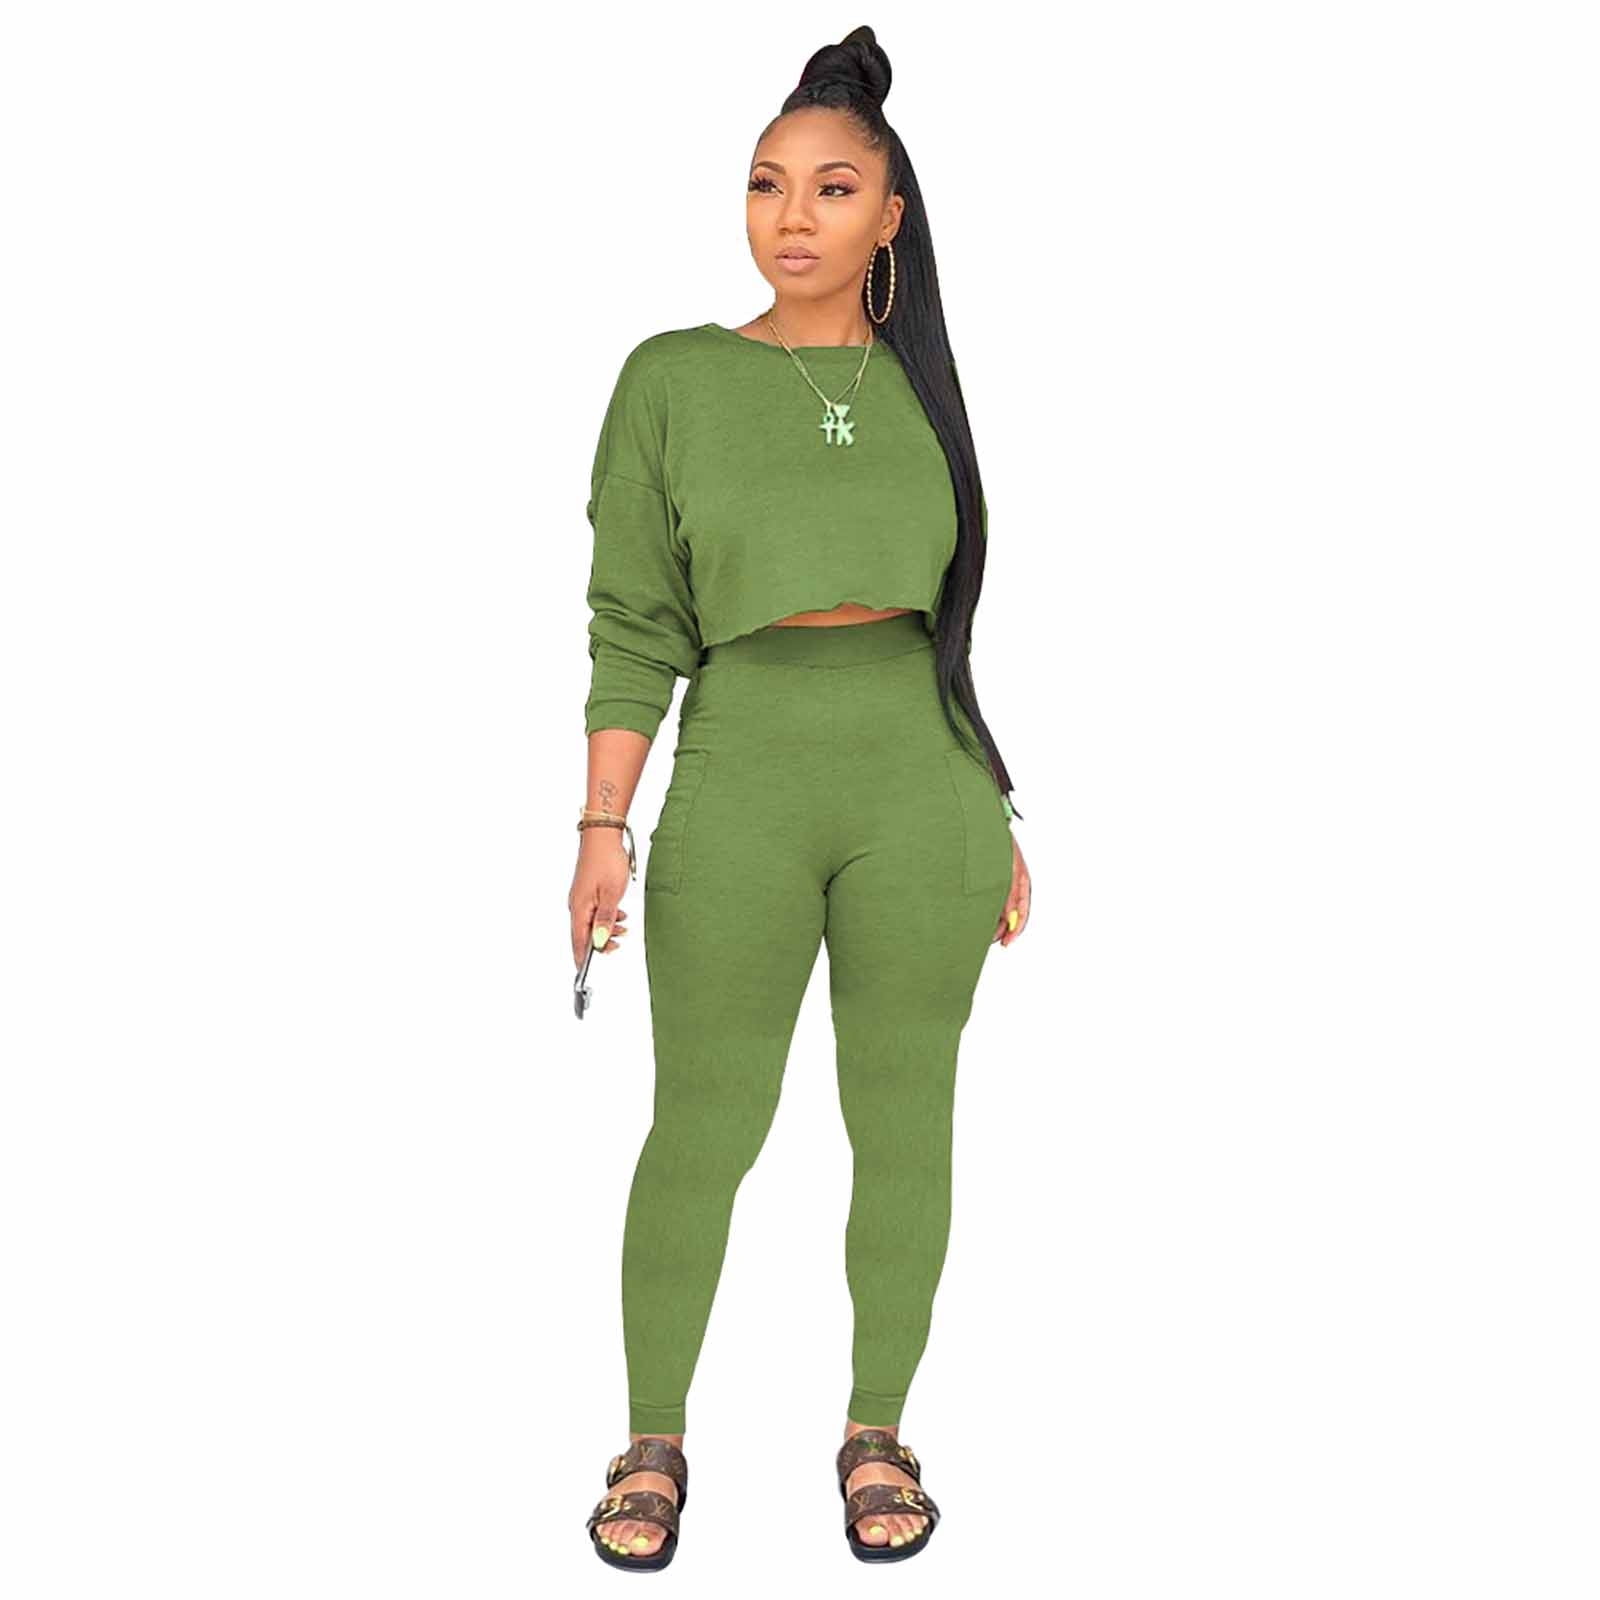 Herrnalise Women's two-piece solid color clothing Women's Fashion